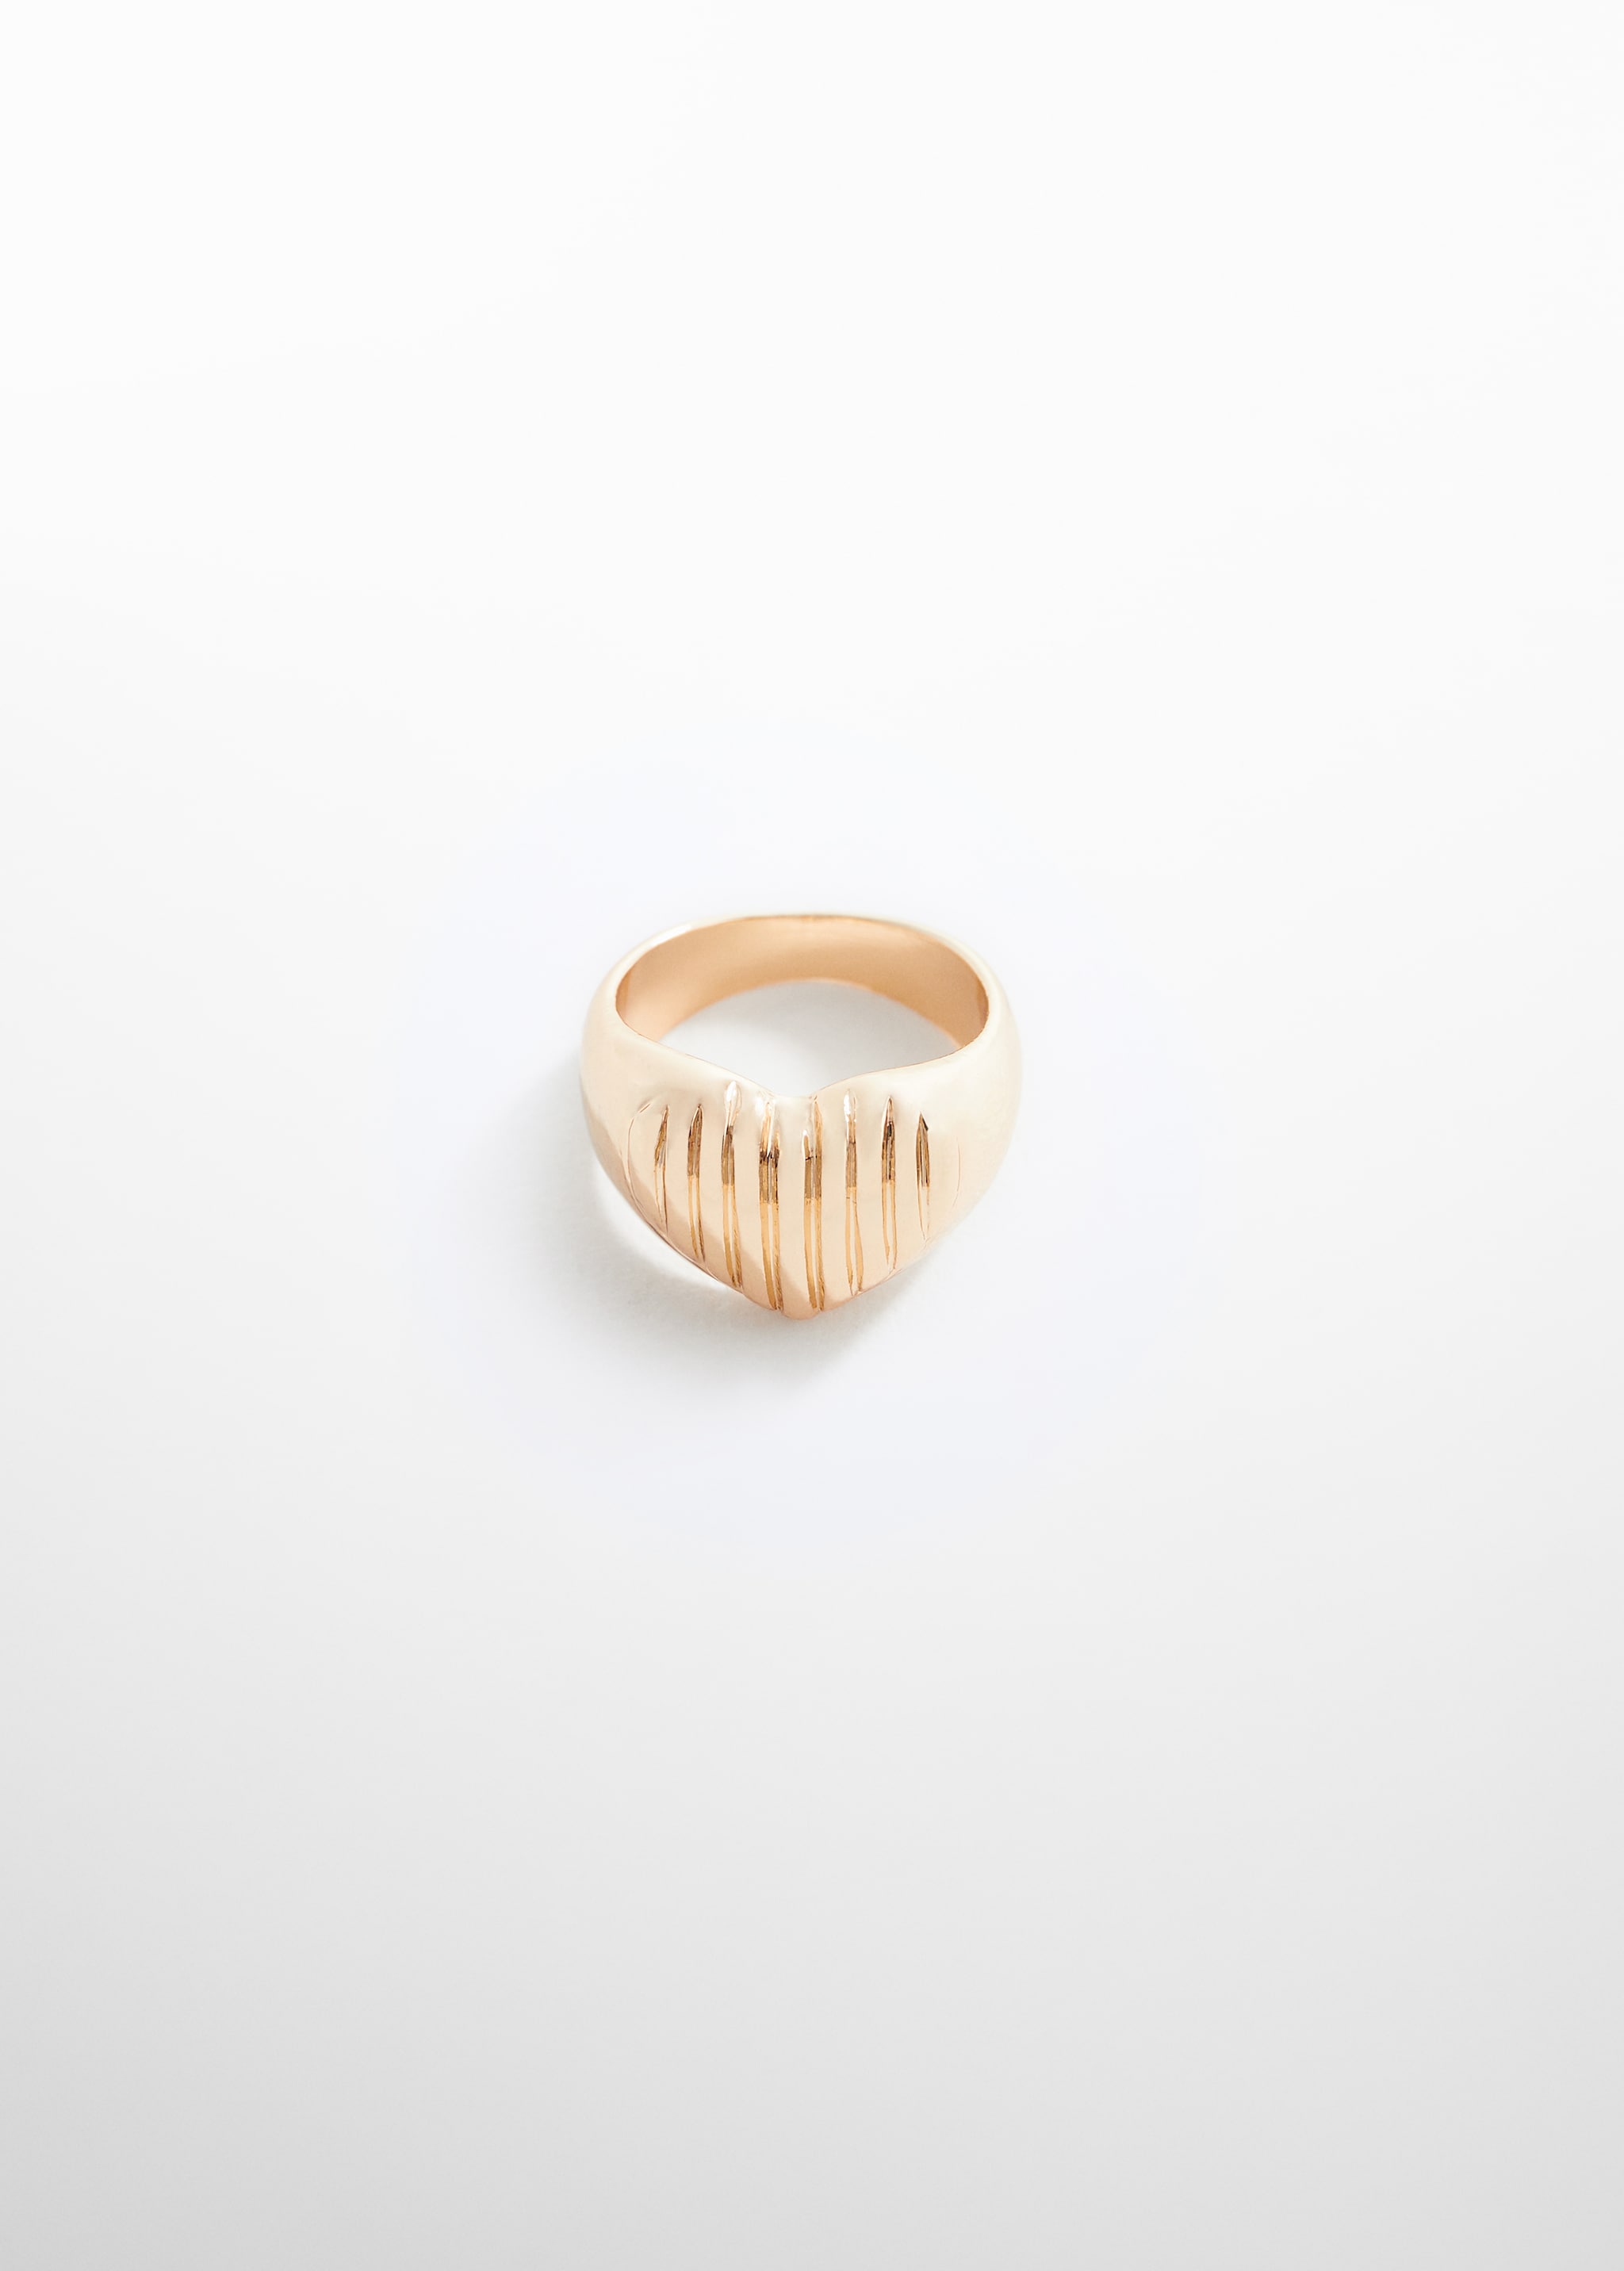 Heart ring - Article without model